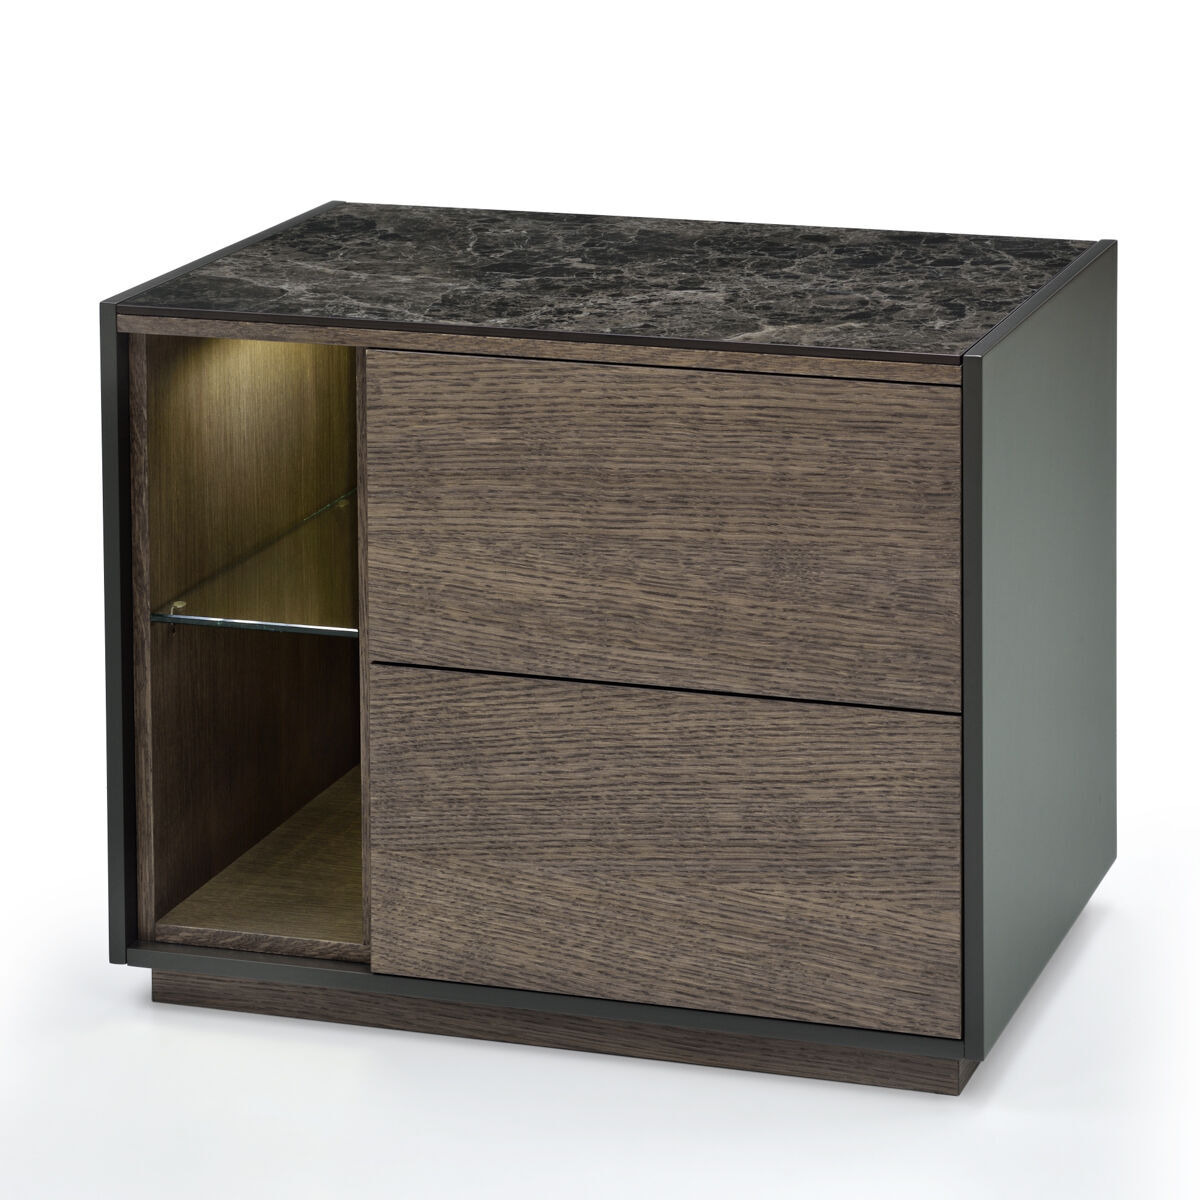 Tosca Marble-effect Top Bedside Table 50cm, Smoked Oak